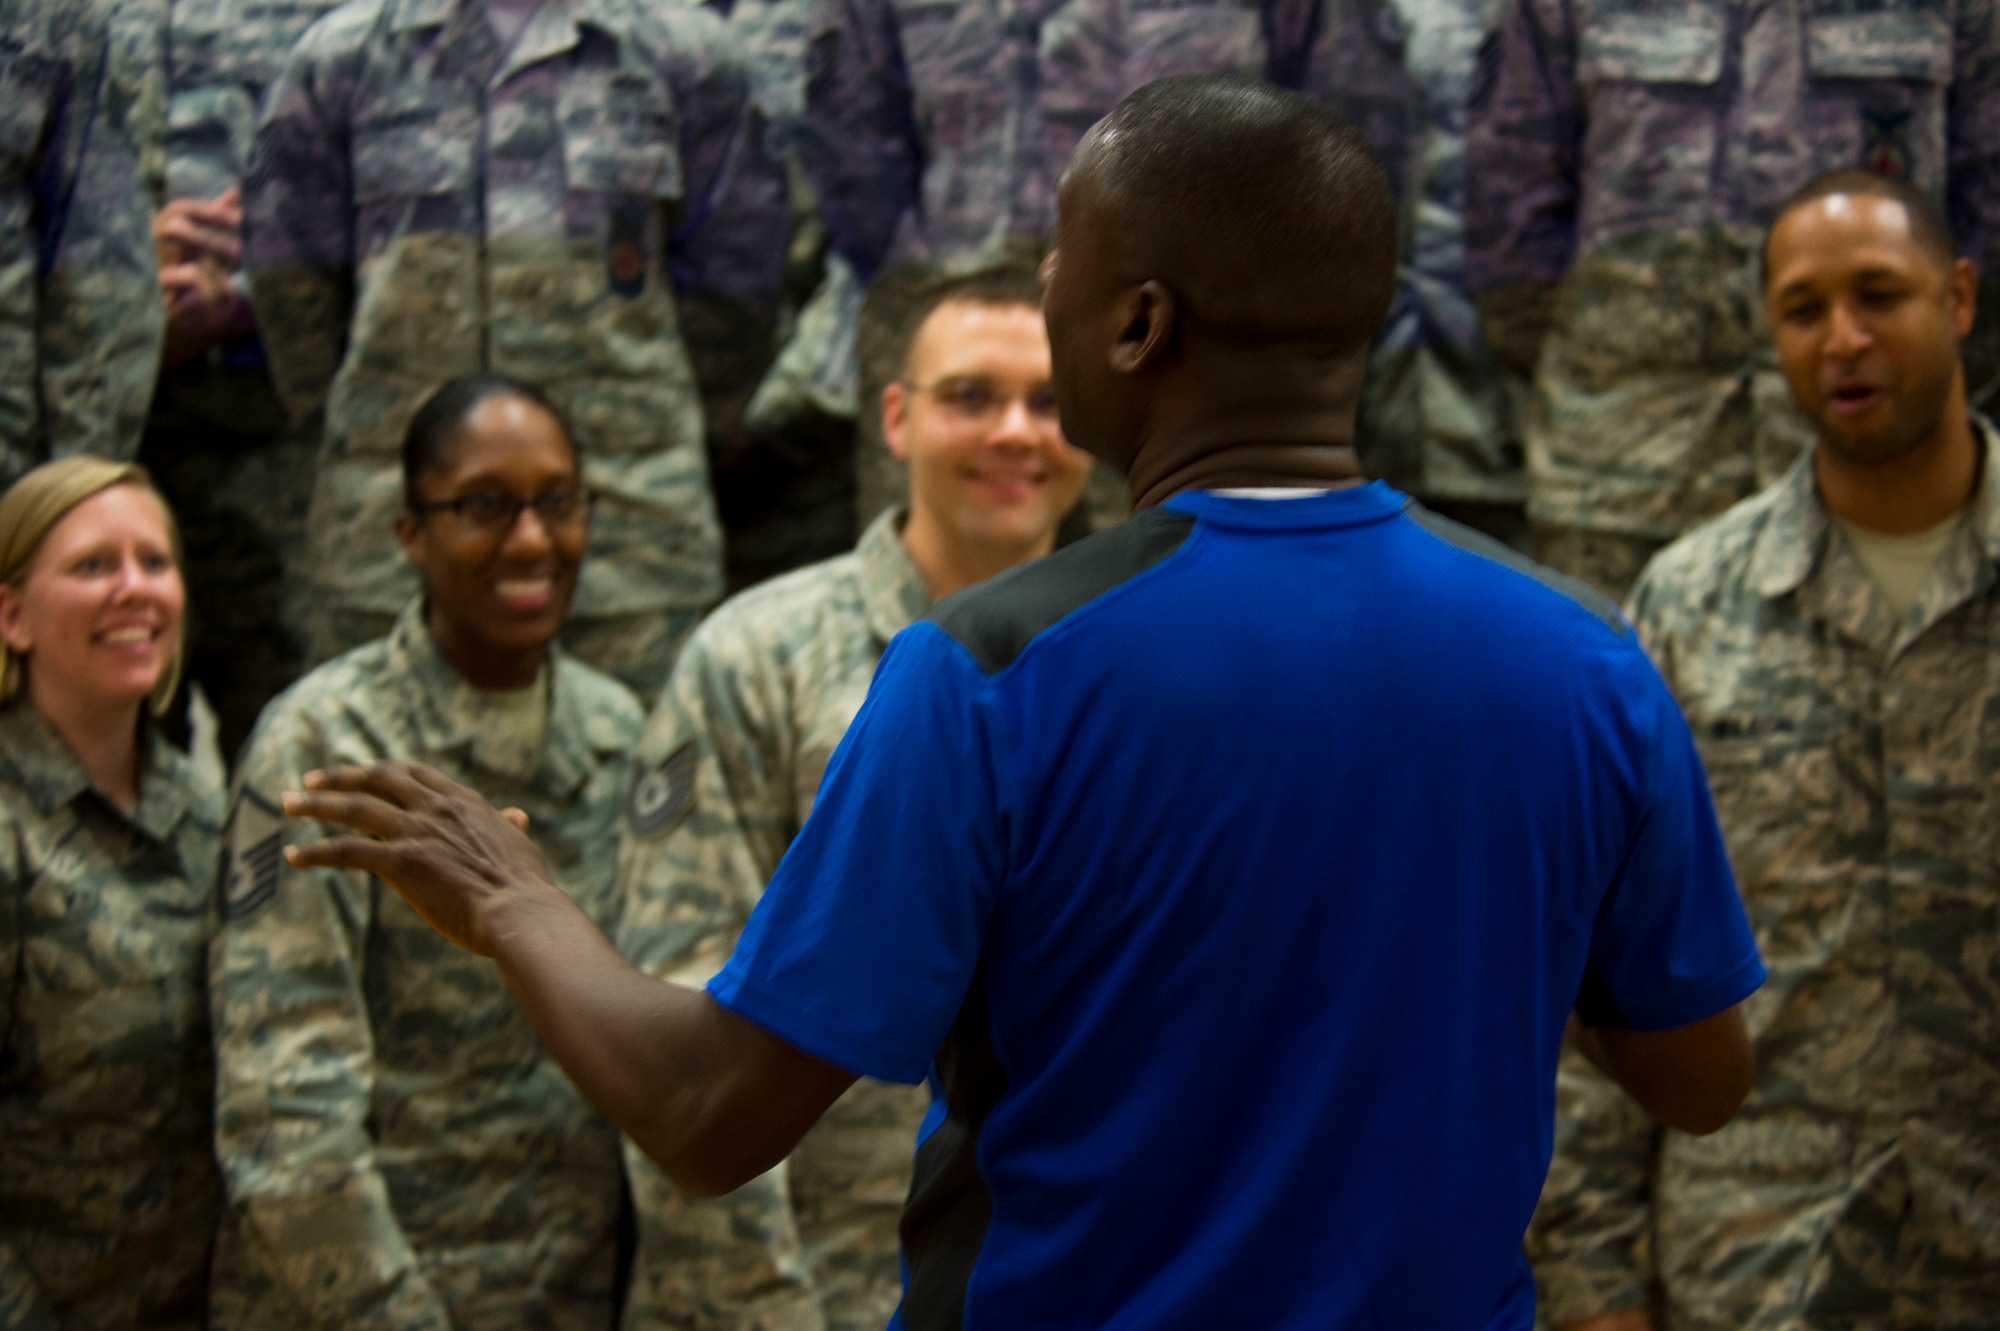 Retired U.S. Air Force Chief Master Sgt. Juan Lewis, known as the Fired Up Chief, speaks to NCOs during a Tier II private organization meeting at the Brick House on Spangdahlem Air Base, Germany, July 12, 2016. The private organization, which focuses on the NCO tier, invited Lewis to offer his perspective on the importance of leadership. (U.S. Air Force Photo by Staff Sgt. Joe W. McFadden/Released)